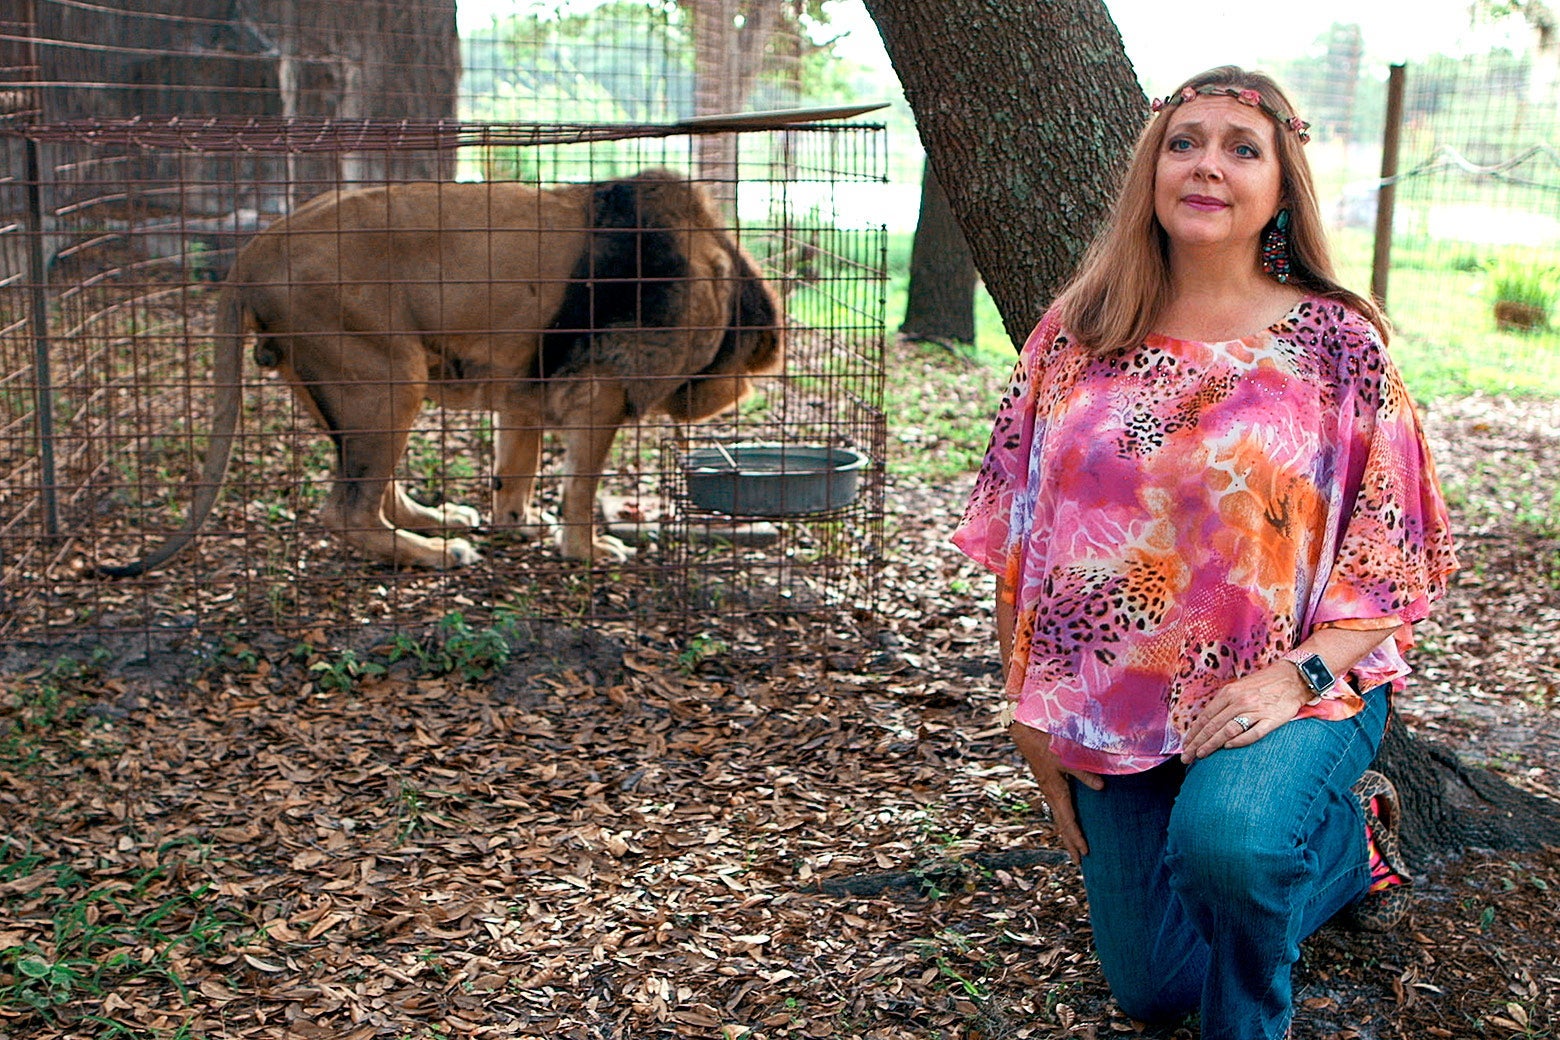 Carole Baskin, wearing a colorful shirt, stands next to a big cat in a wire cage.